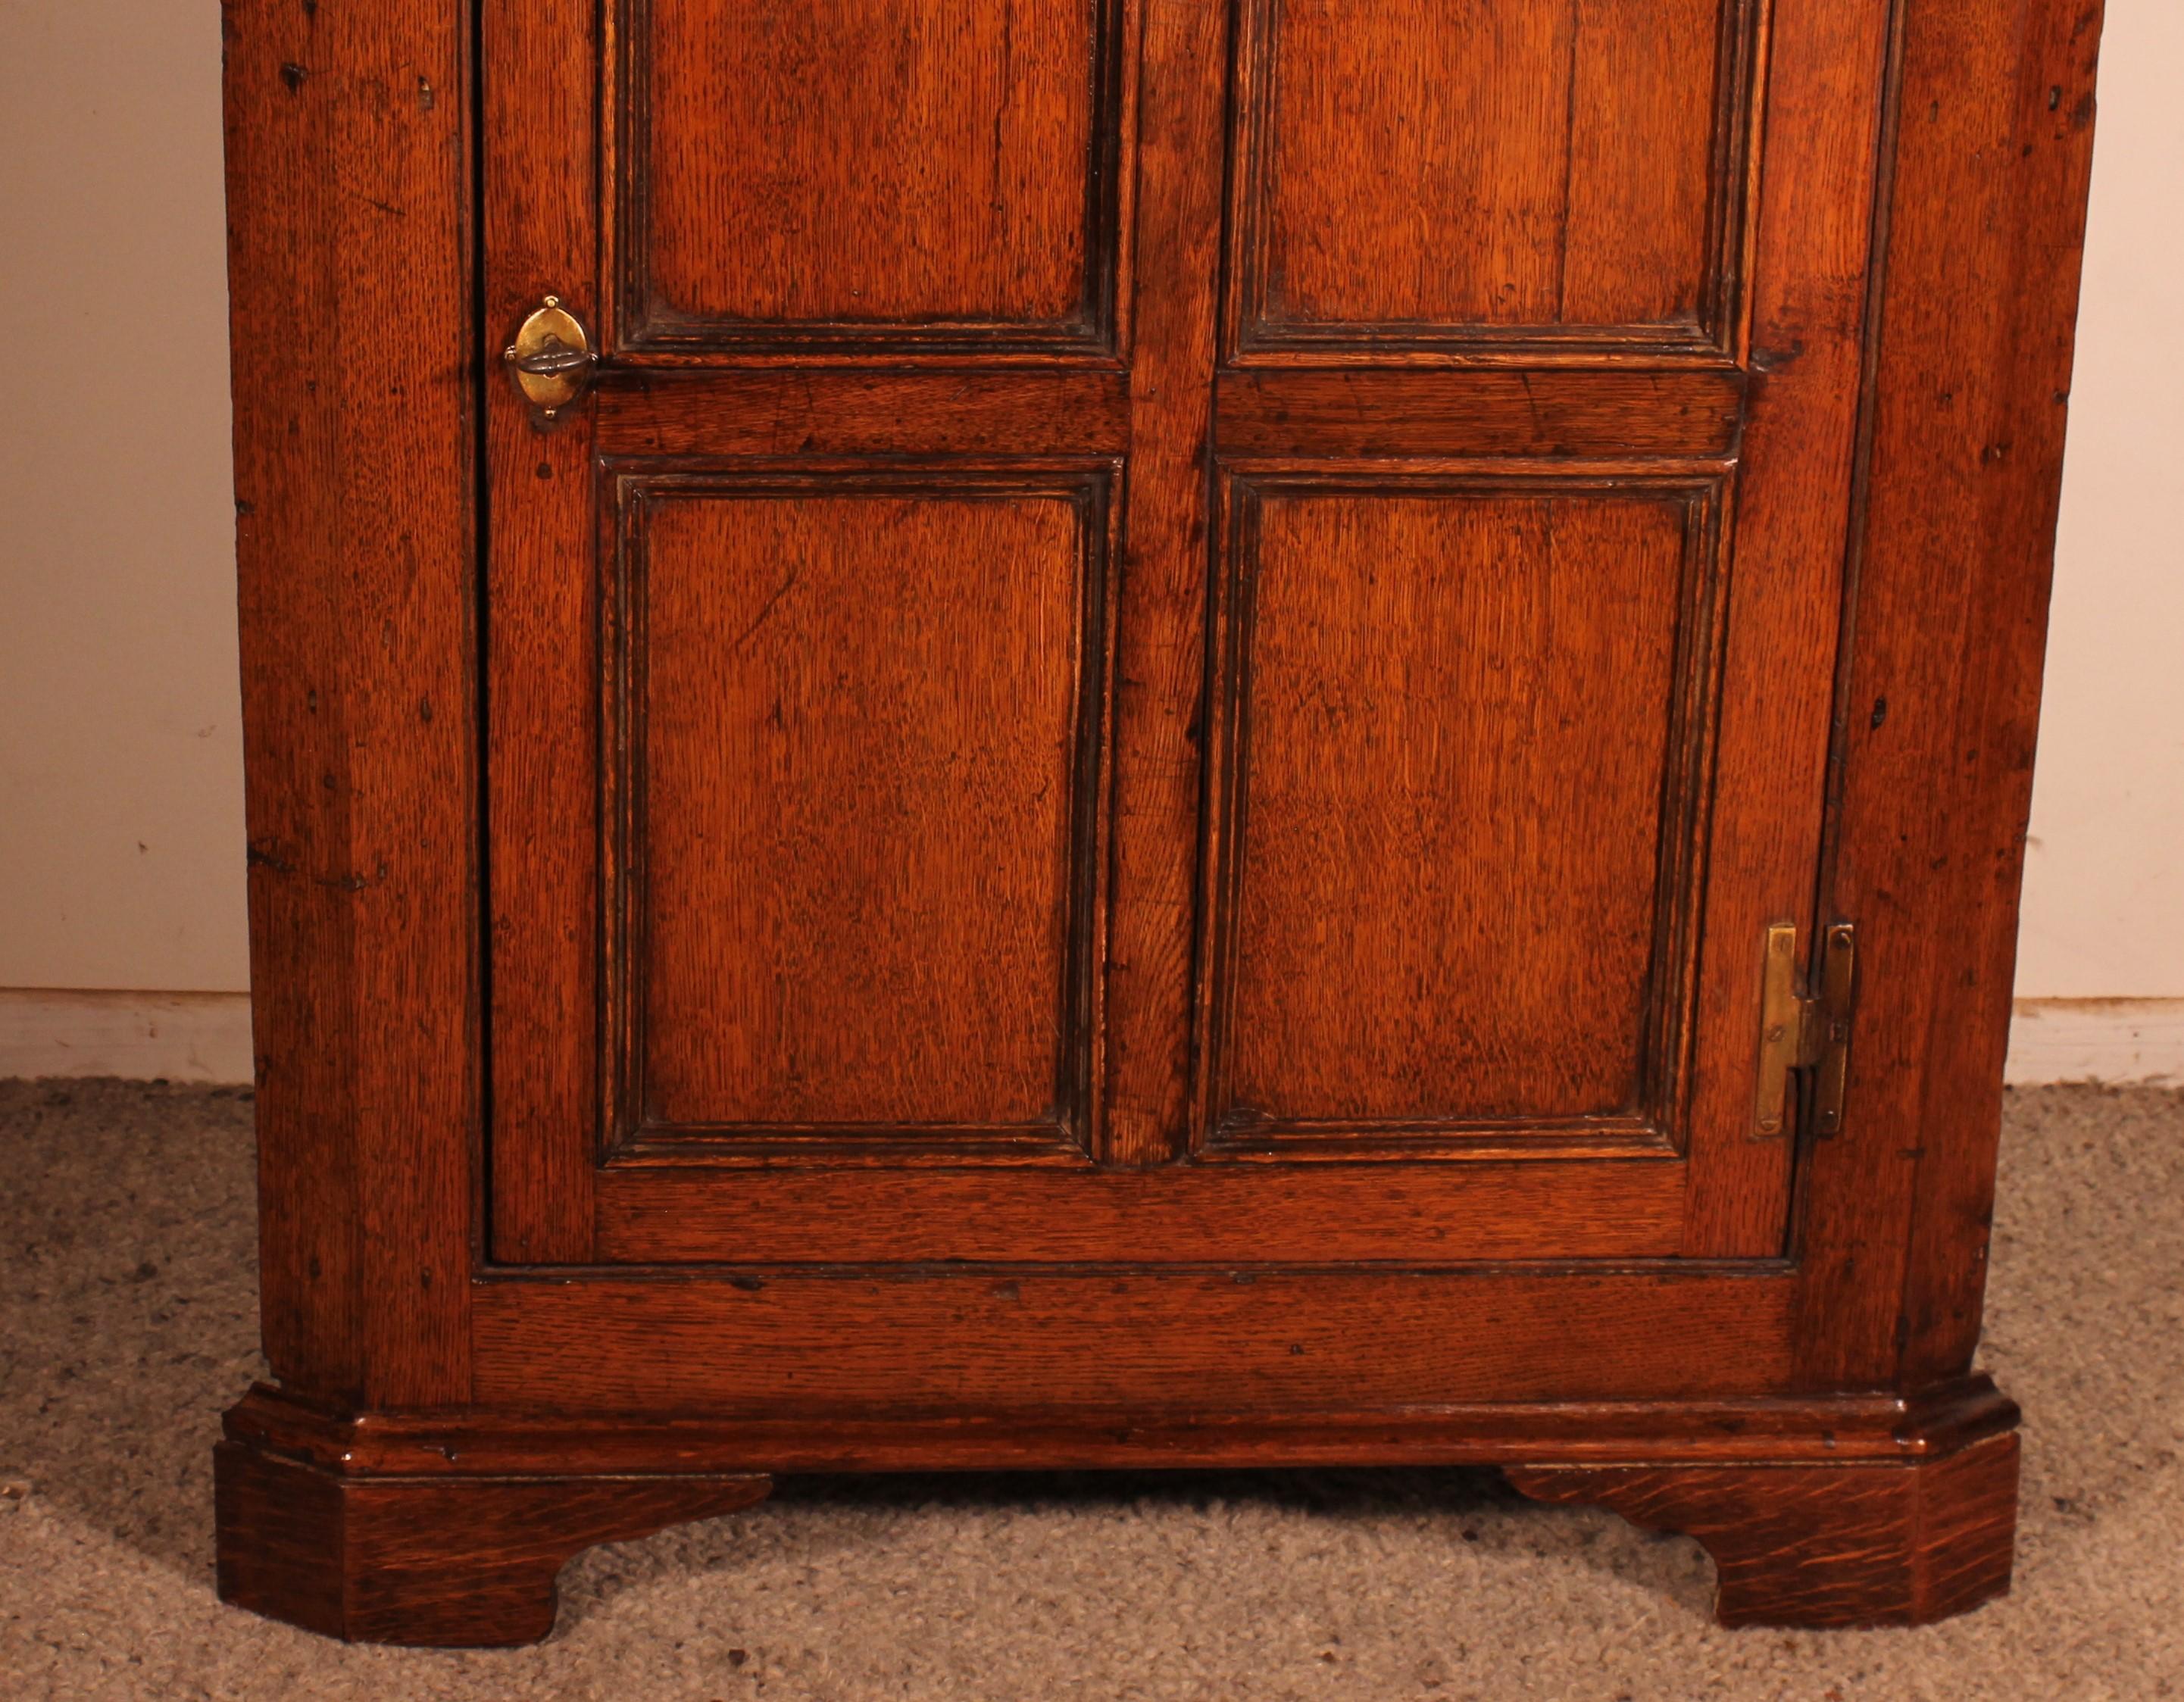 Lovely corner cupboard from the Georgian period in oak circa 1800
small unusual model composed of a door with shelves inside.
Very nice molding work on the door
Superb patina and in perfect condition
length on the right facade; 58cm
length on the